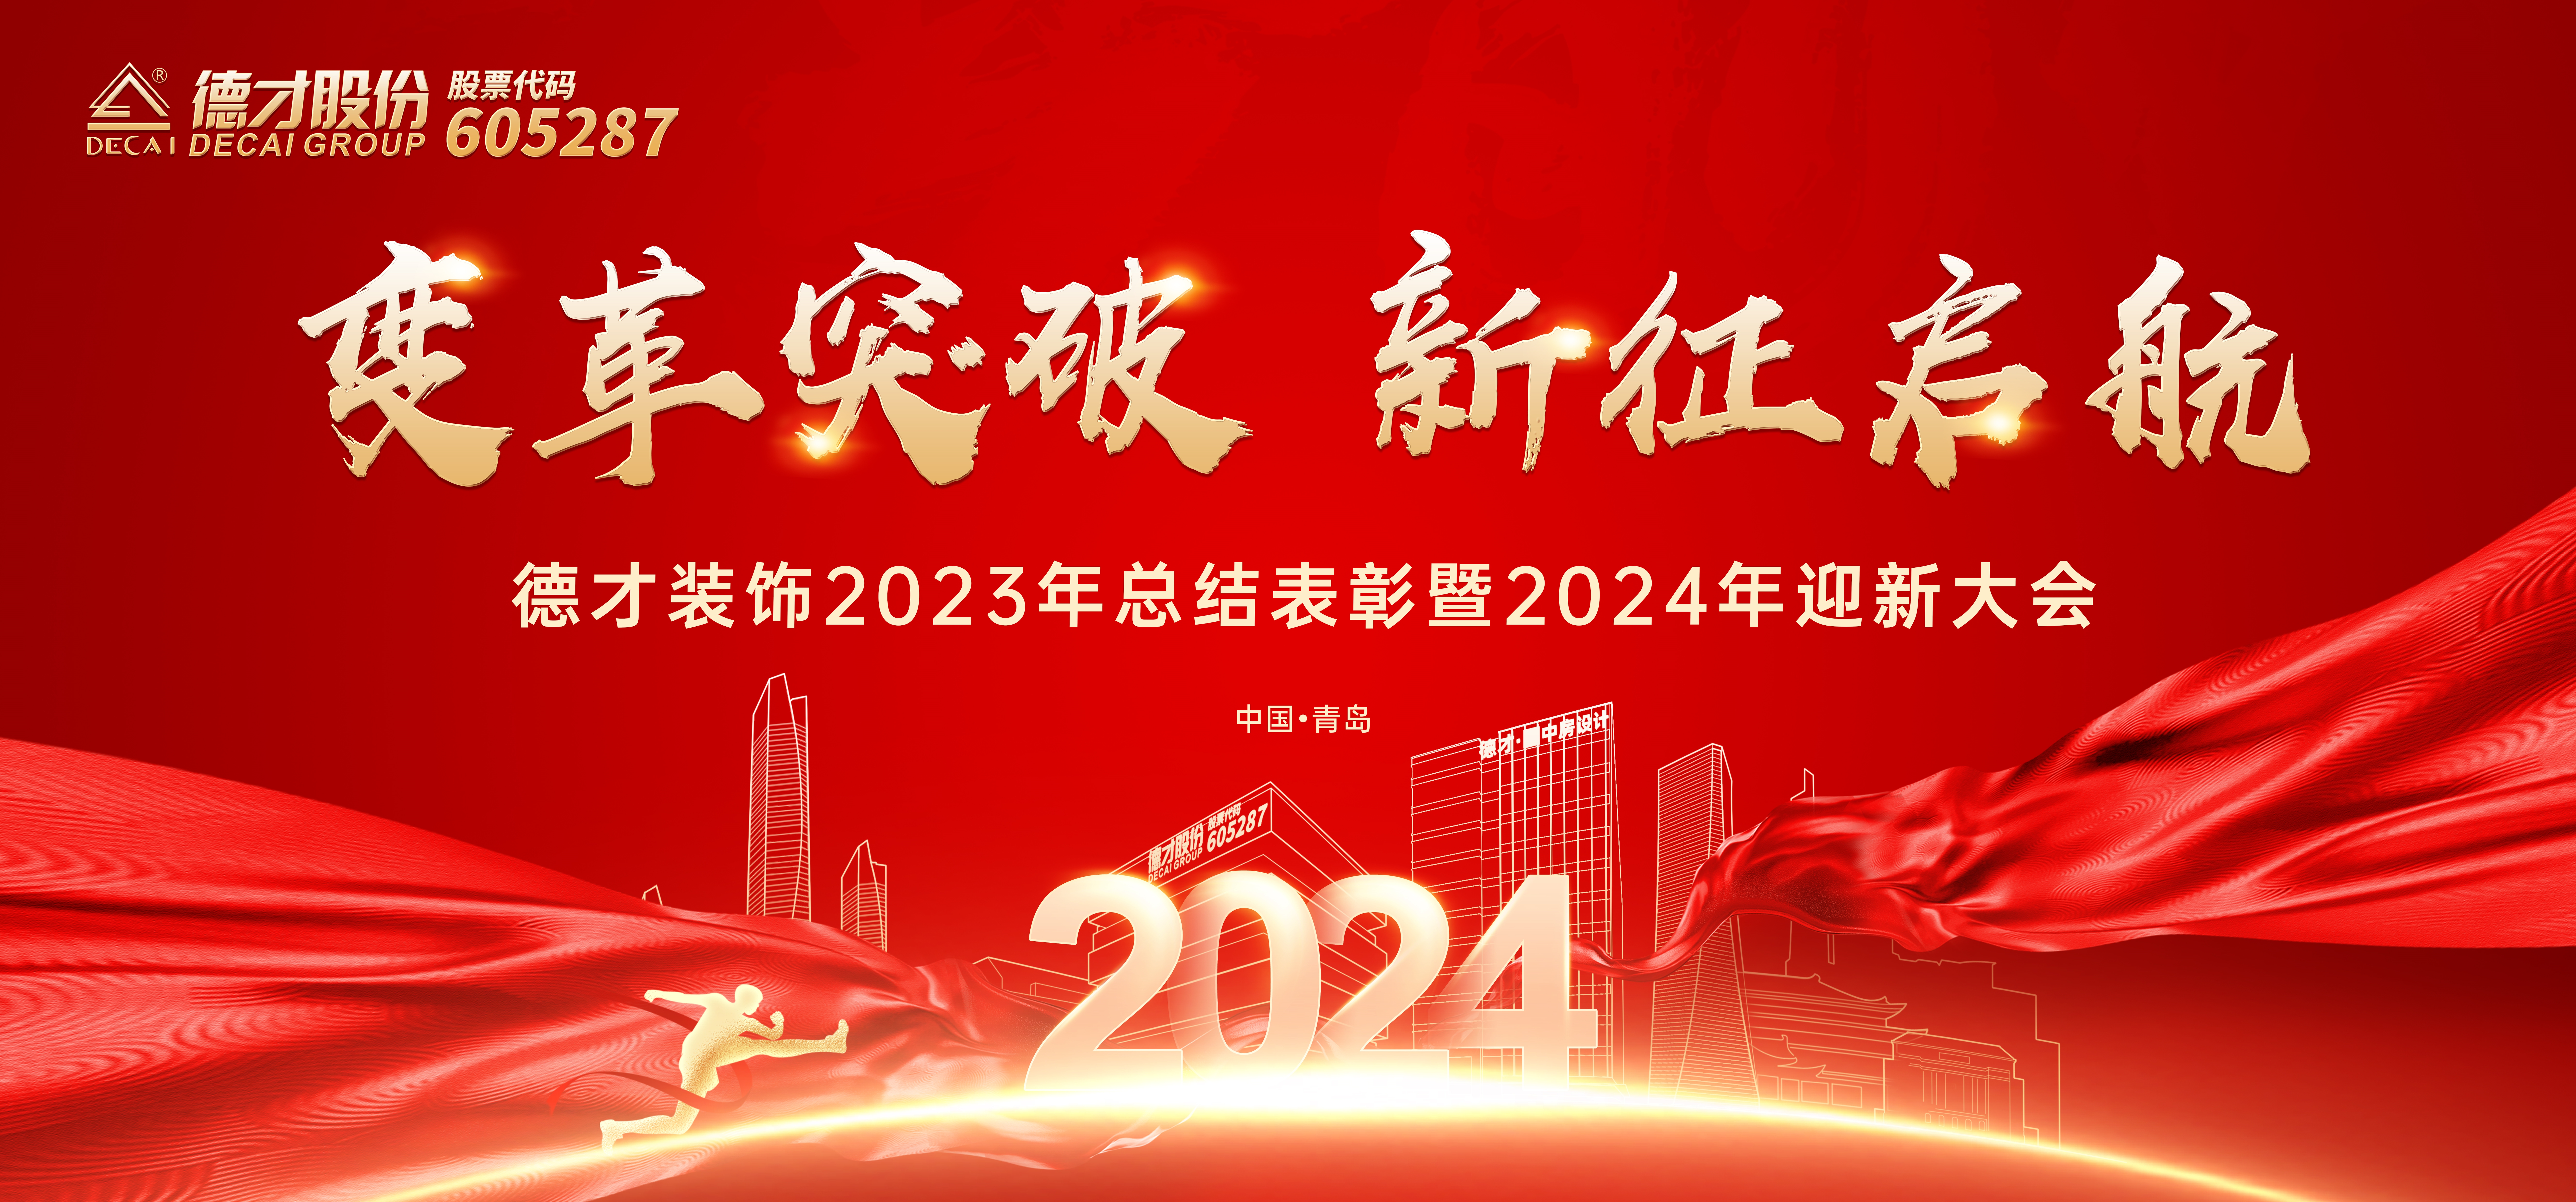 Decai Decoration held the 2023 annual summary commendation and the 2024 welcome conference